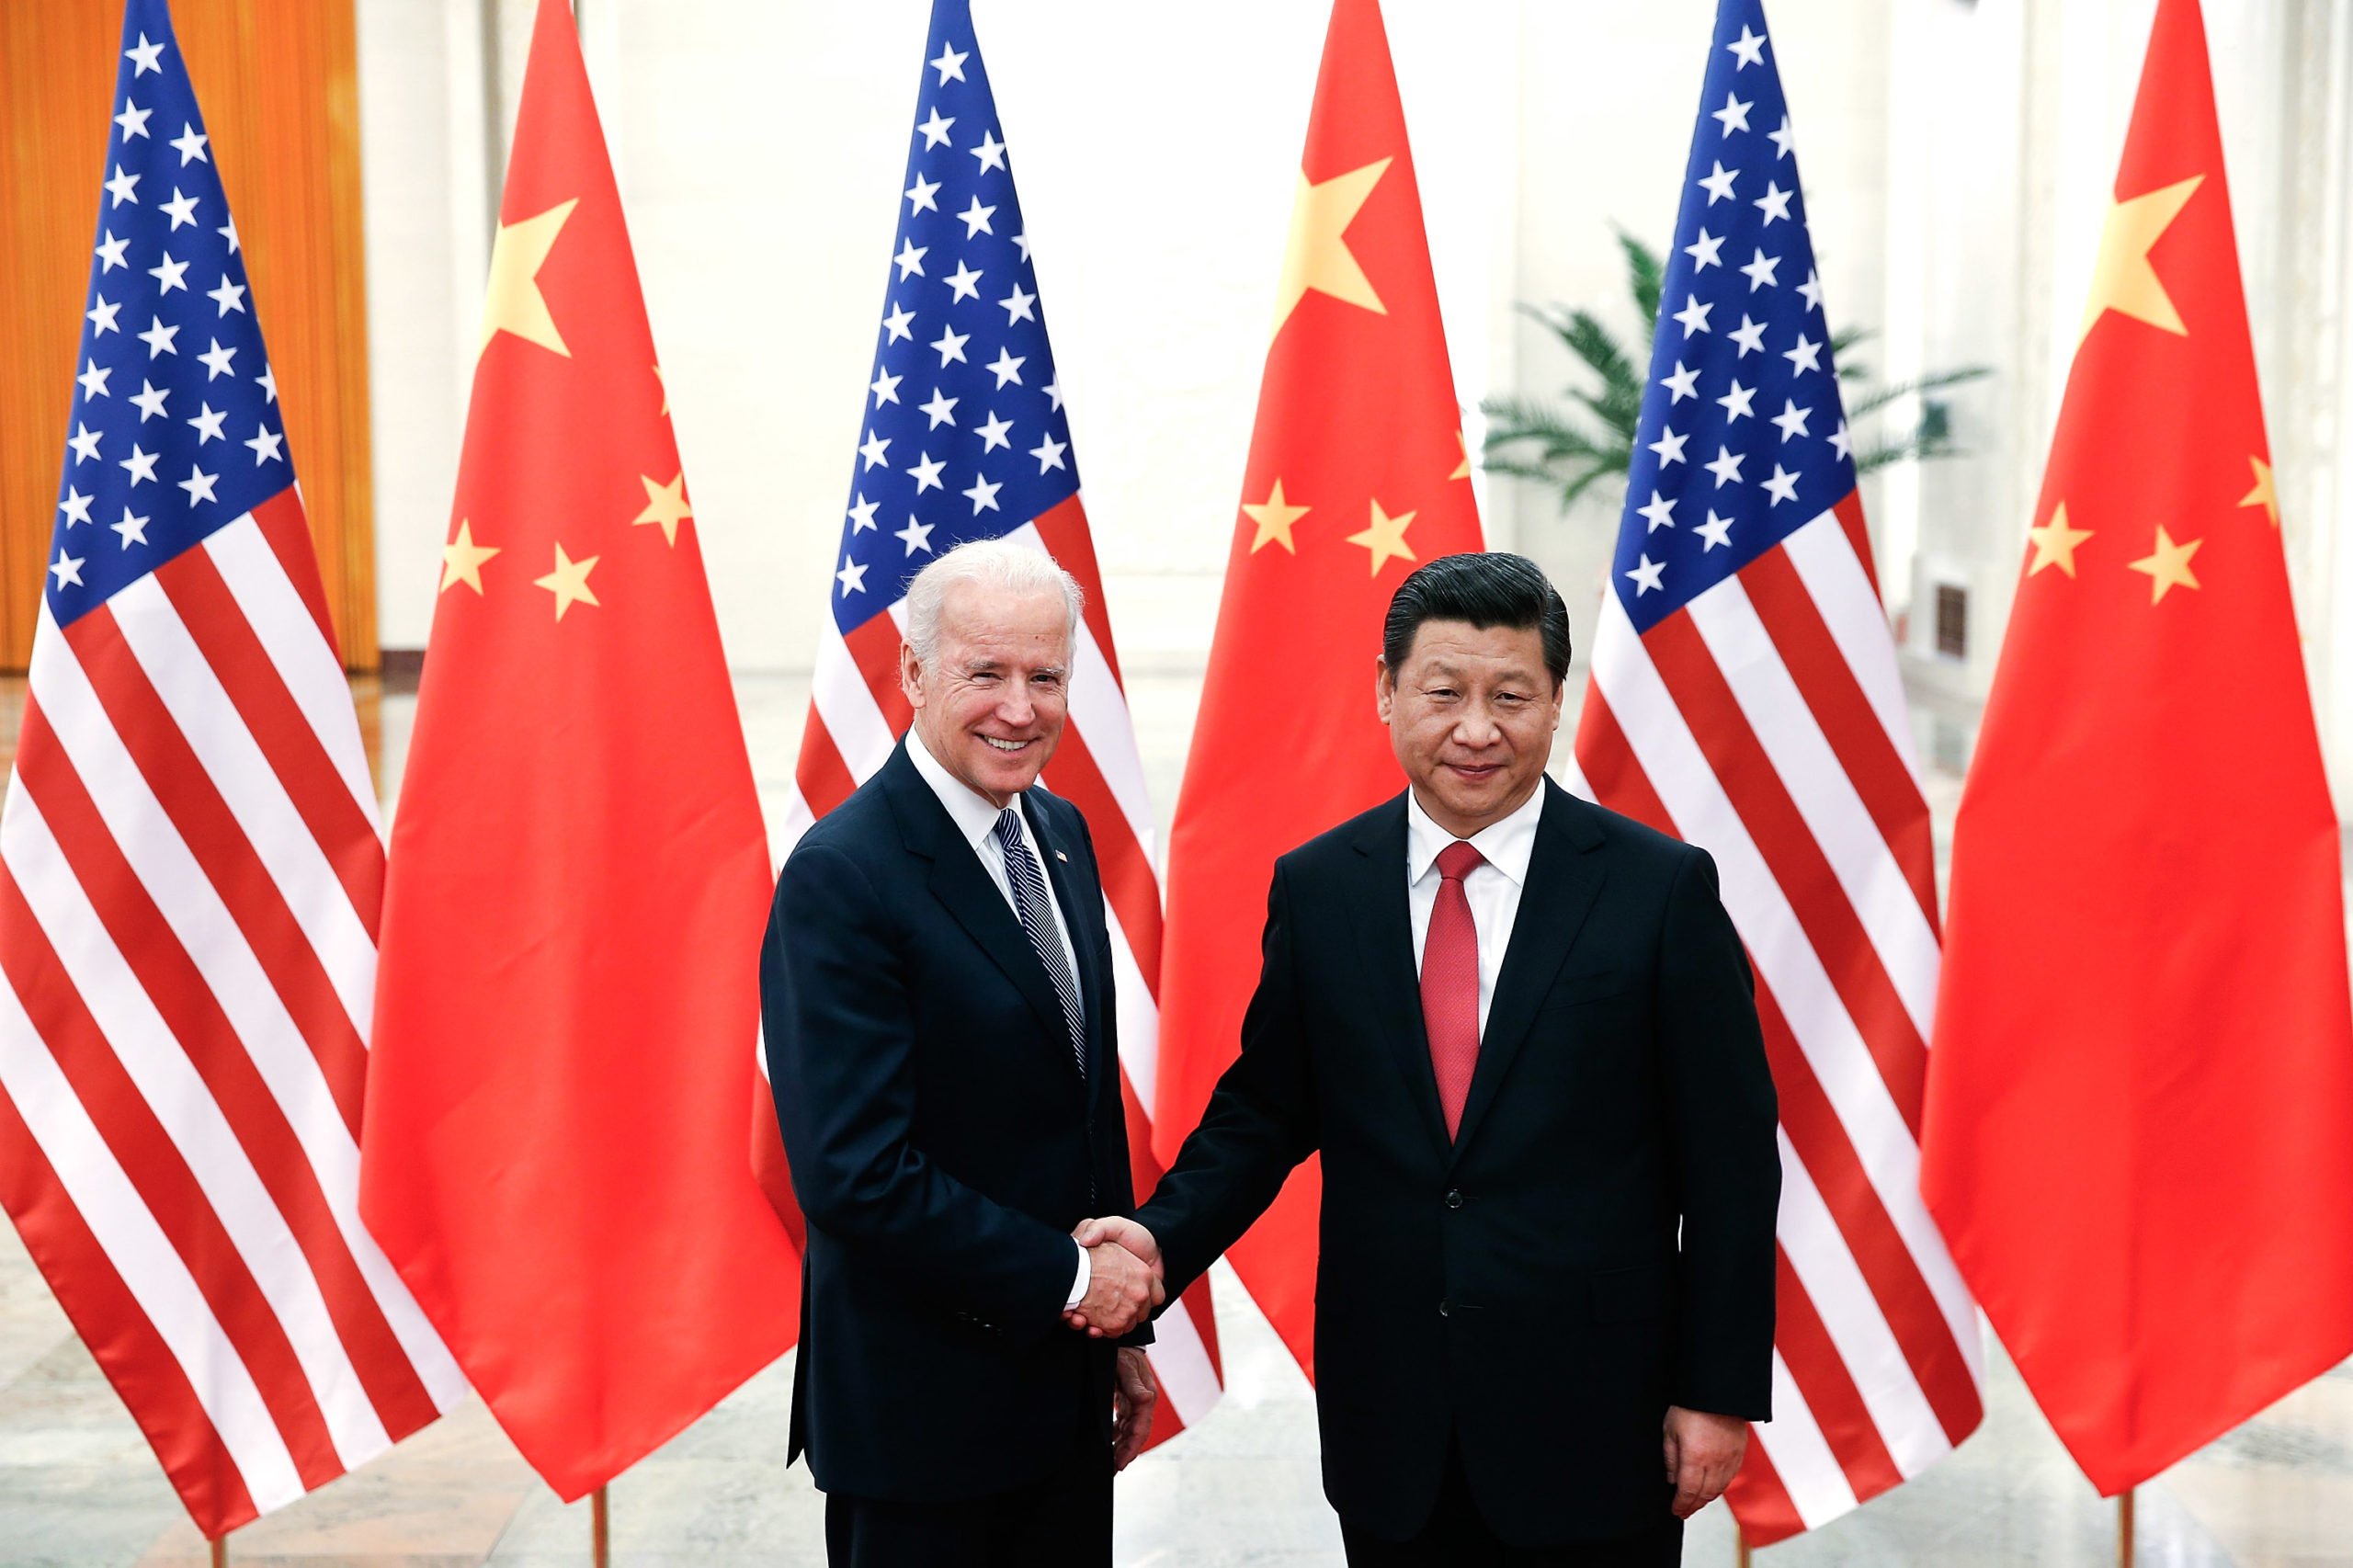 BEIJING, CHINA - DECEMBER 04: Chinese President Xi Jinping (R) shake hands with U.S Vice President Joe Biden (L) inside the Great Hall of the People on December 4, 2013 in Beijing, China. U.S Vice President Joe Biden will pay an official visit to China from December 4 to 5. (Photo by Lintao Zhang/Getty Images)